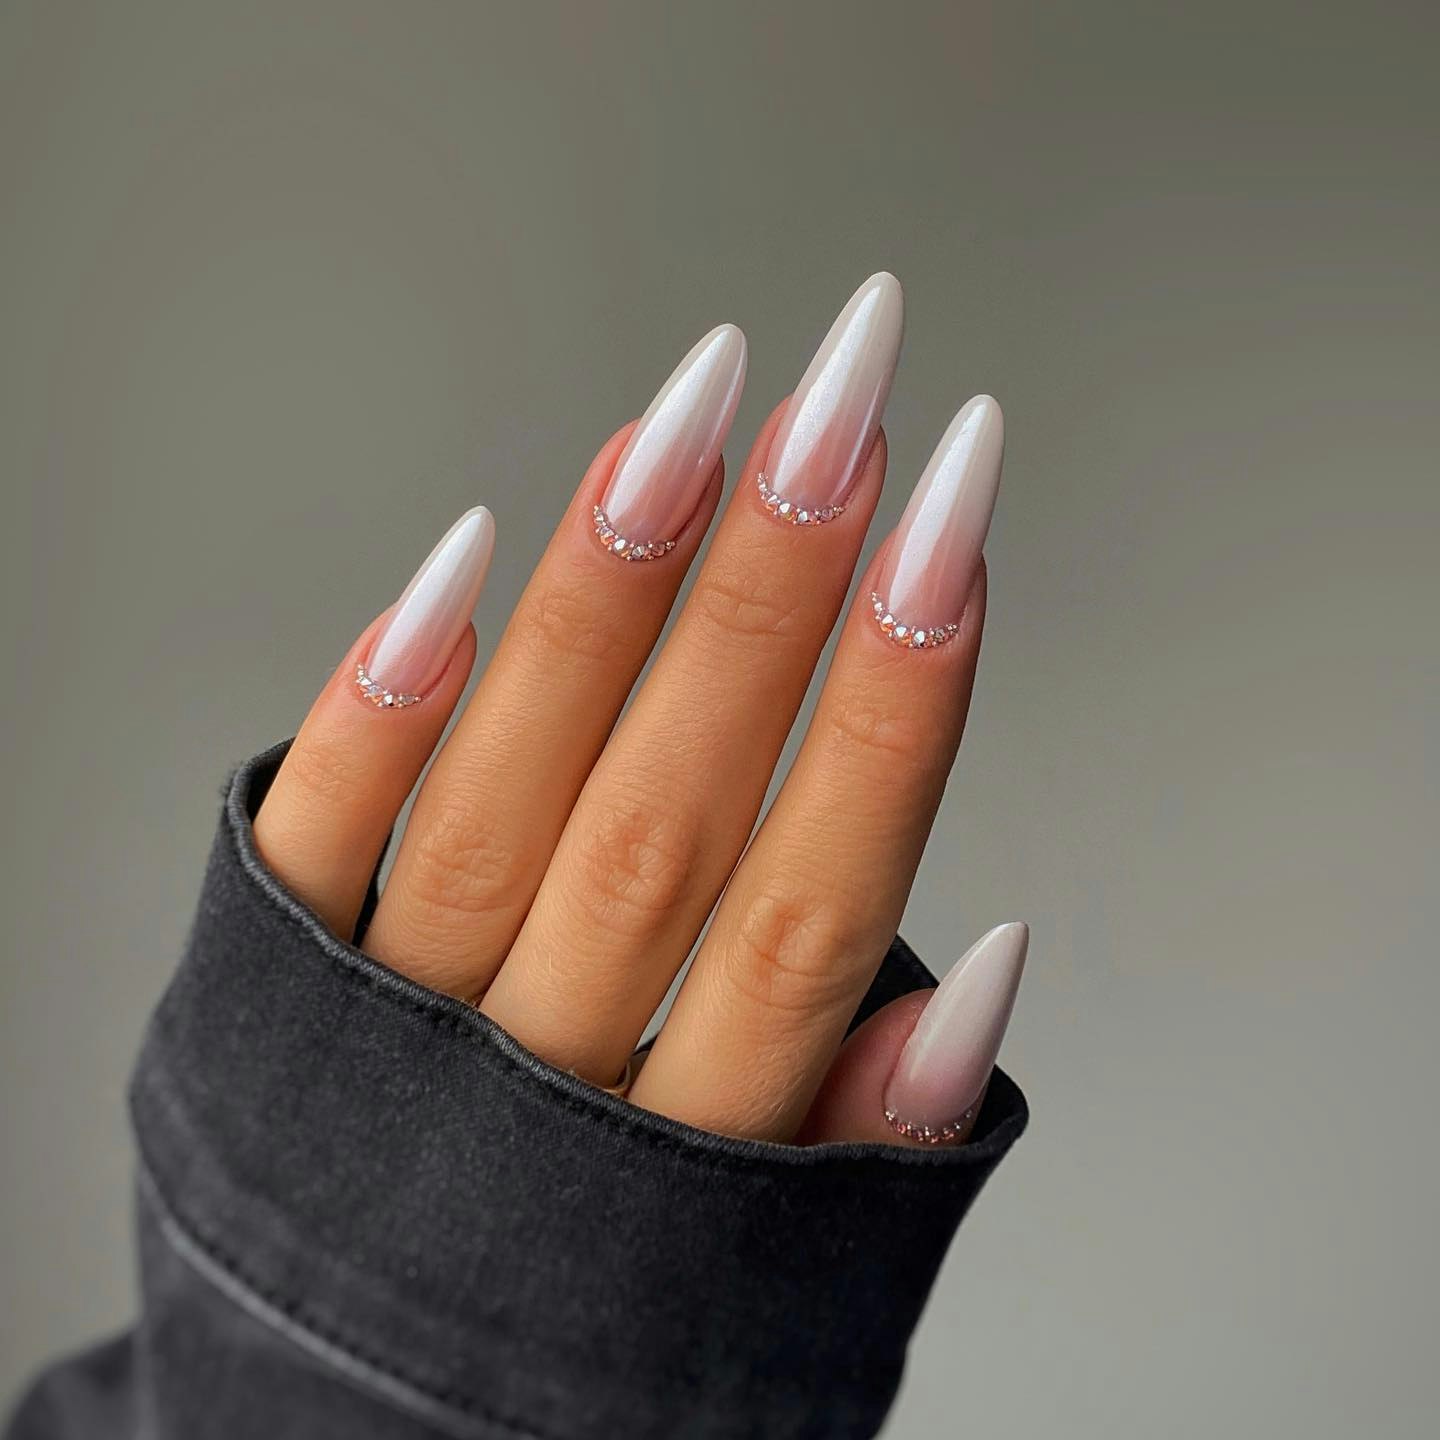 7 White Nail Ideas You Need To Try Now | Beauty & Hair | Grazia